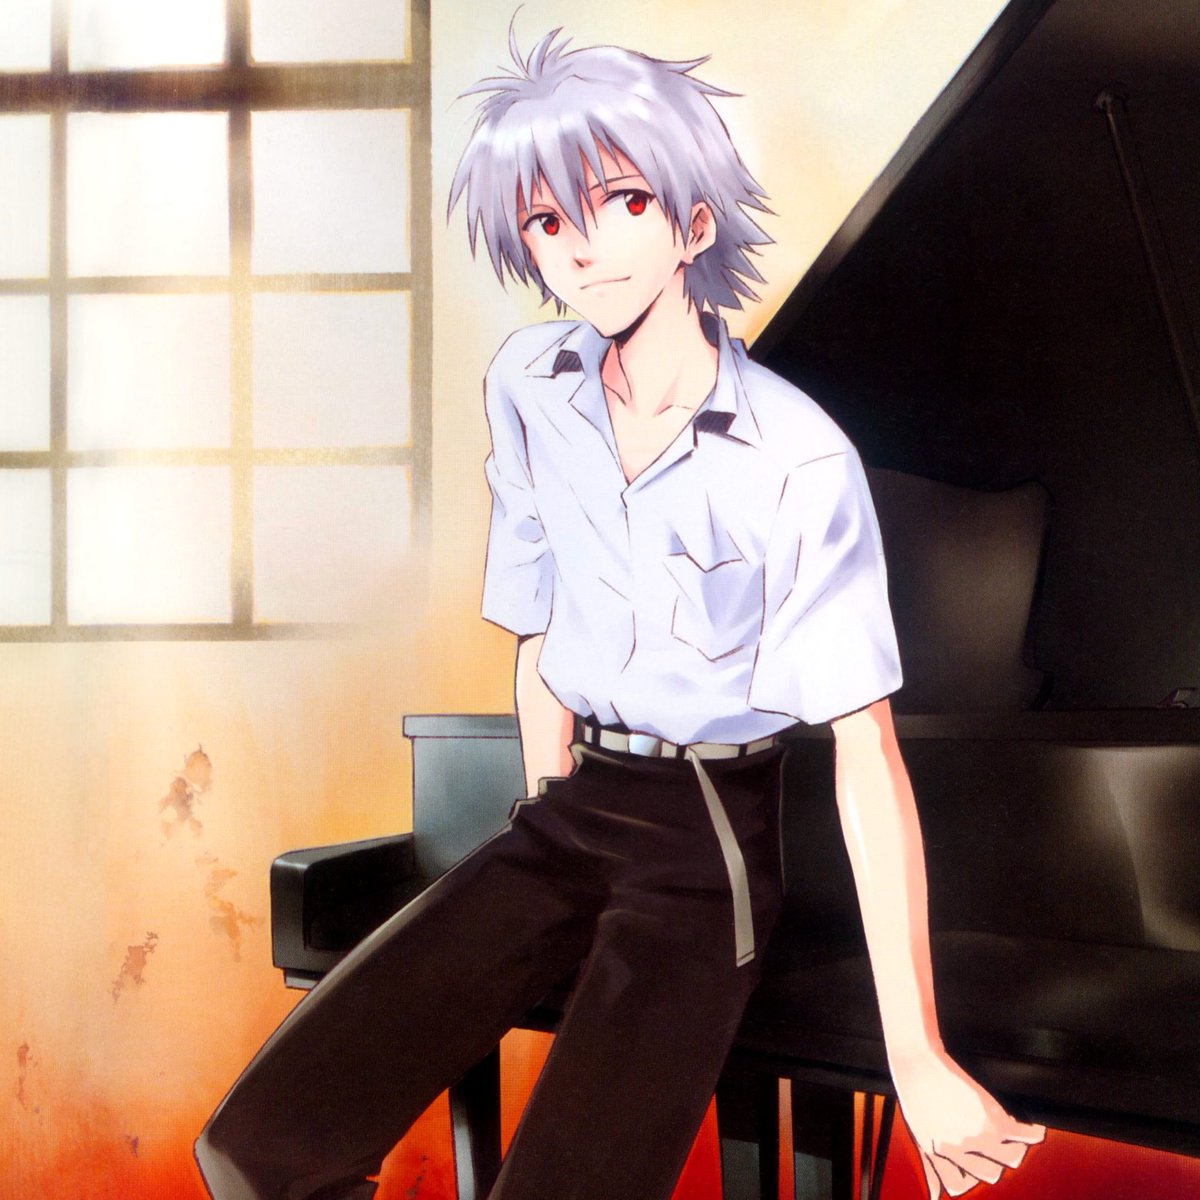 @aikrafudo @sosasoshy @izonedoll @dyzuil *switches the pose and changes clothes*
~Don’t worry lilim, i am just here to play piano 
*smirks*